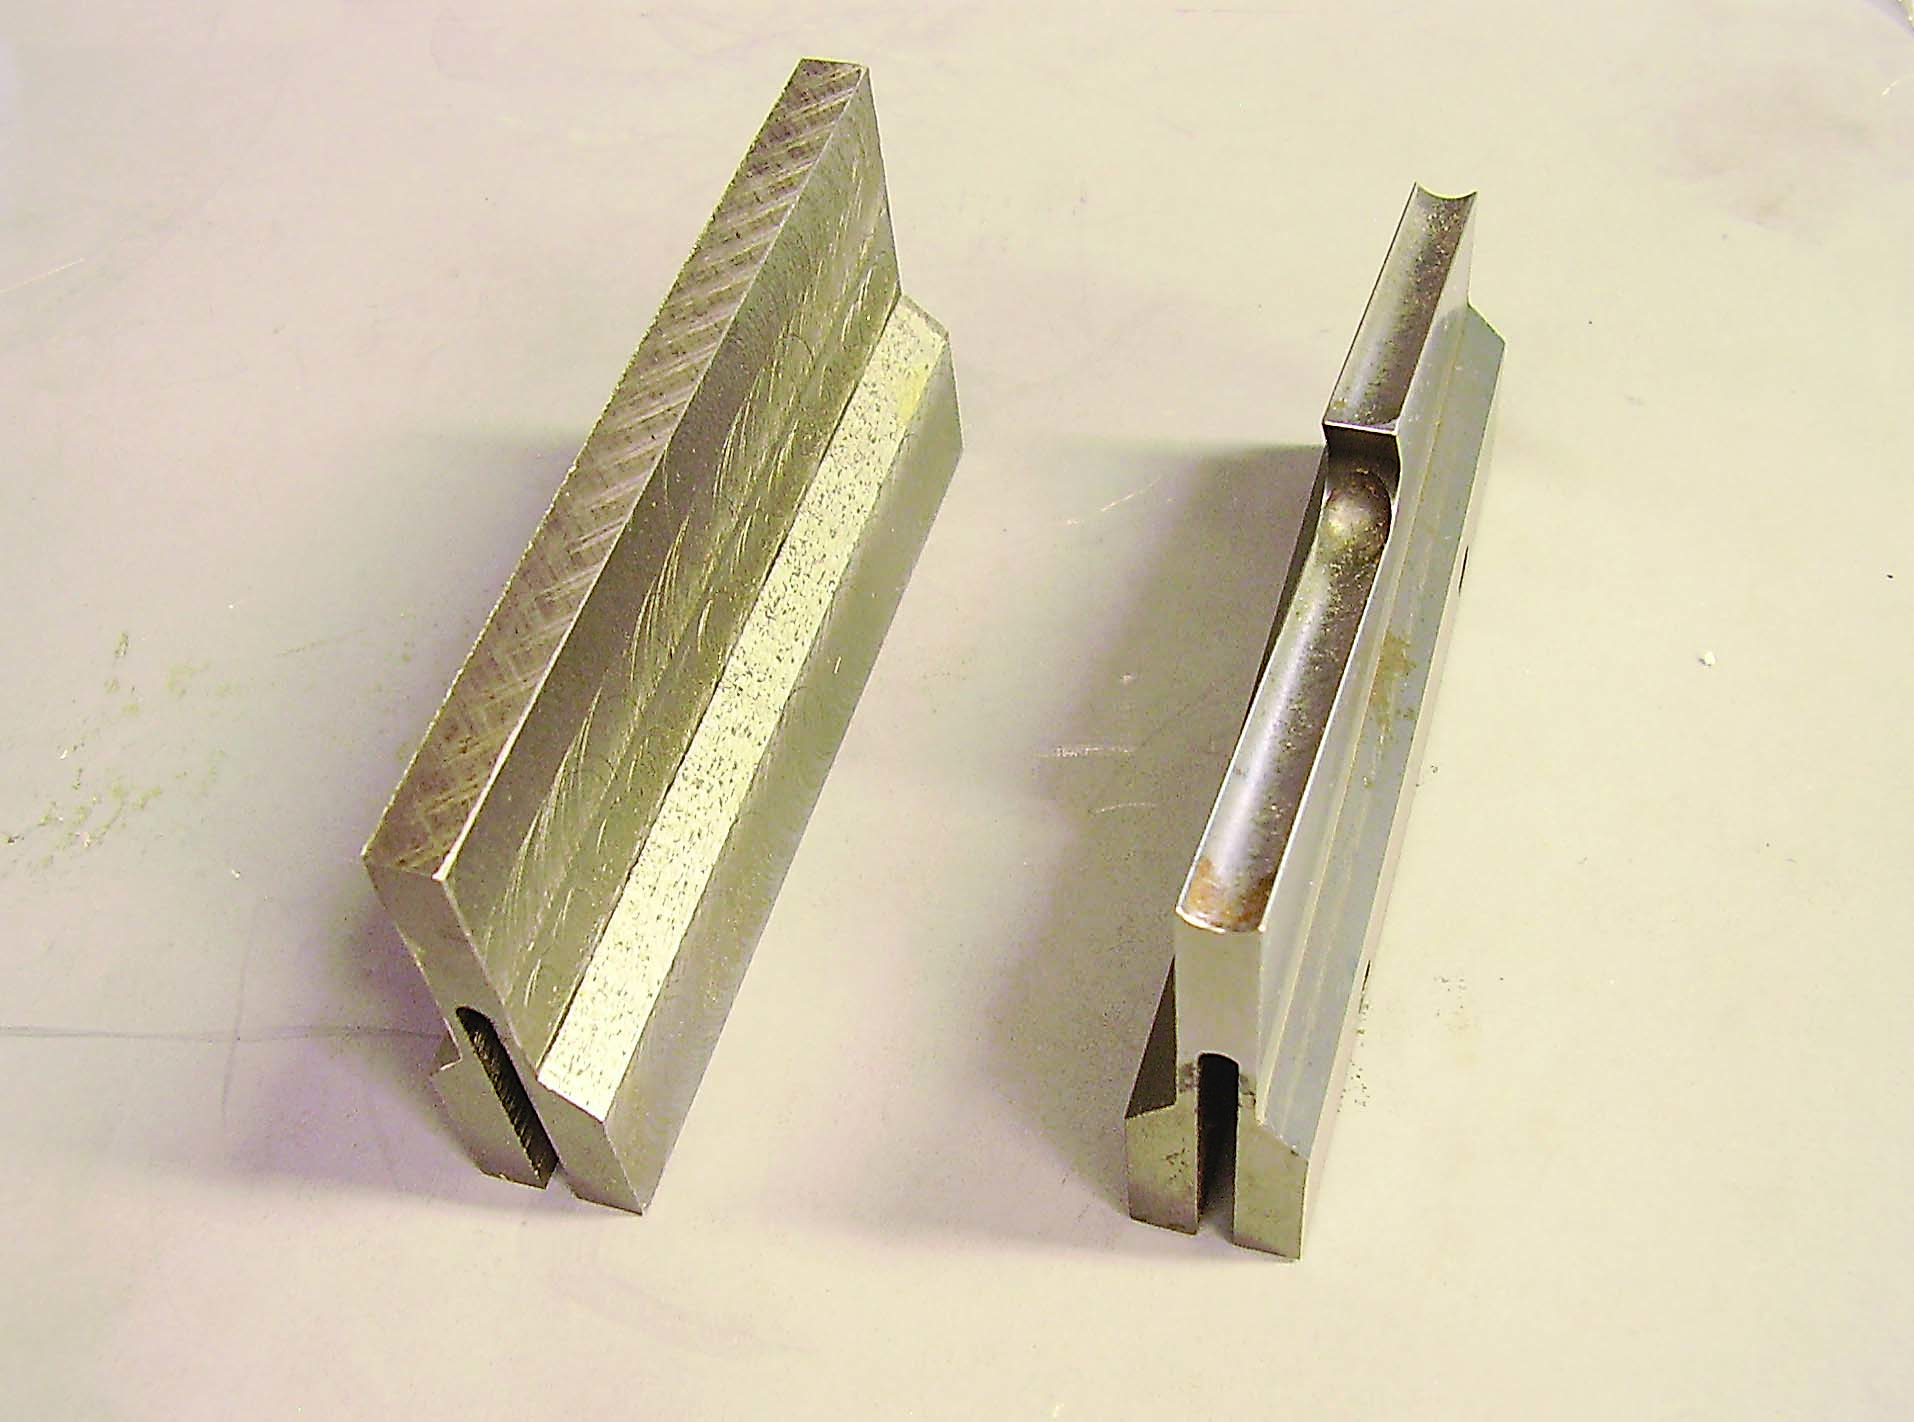 The part after slotting is displayed at left beside the finished part.